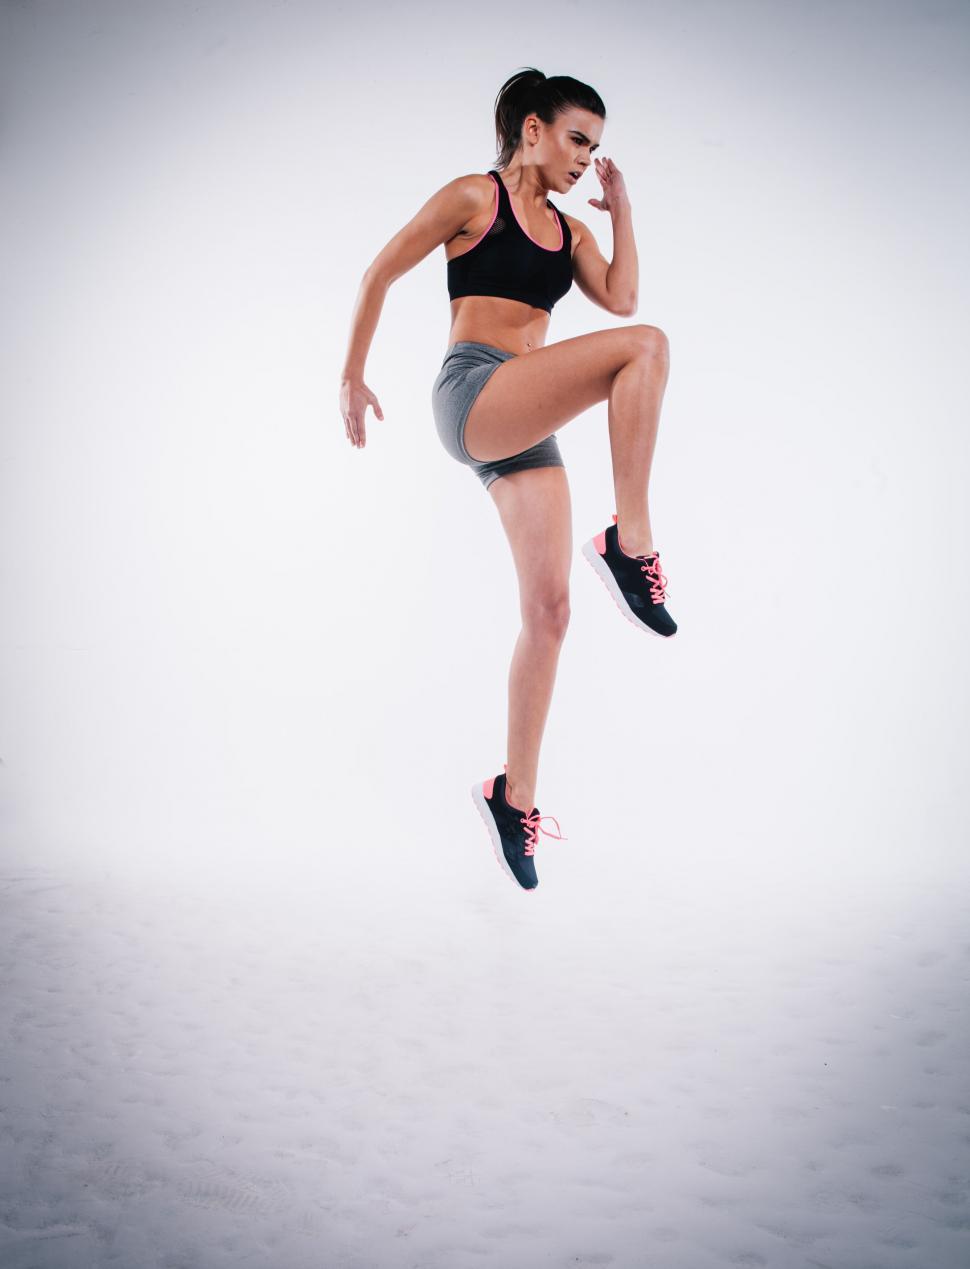 Free Image of Fitness woman mid-jump on white background 